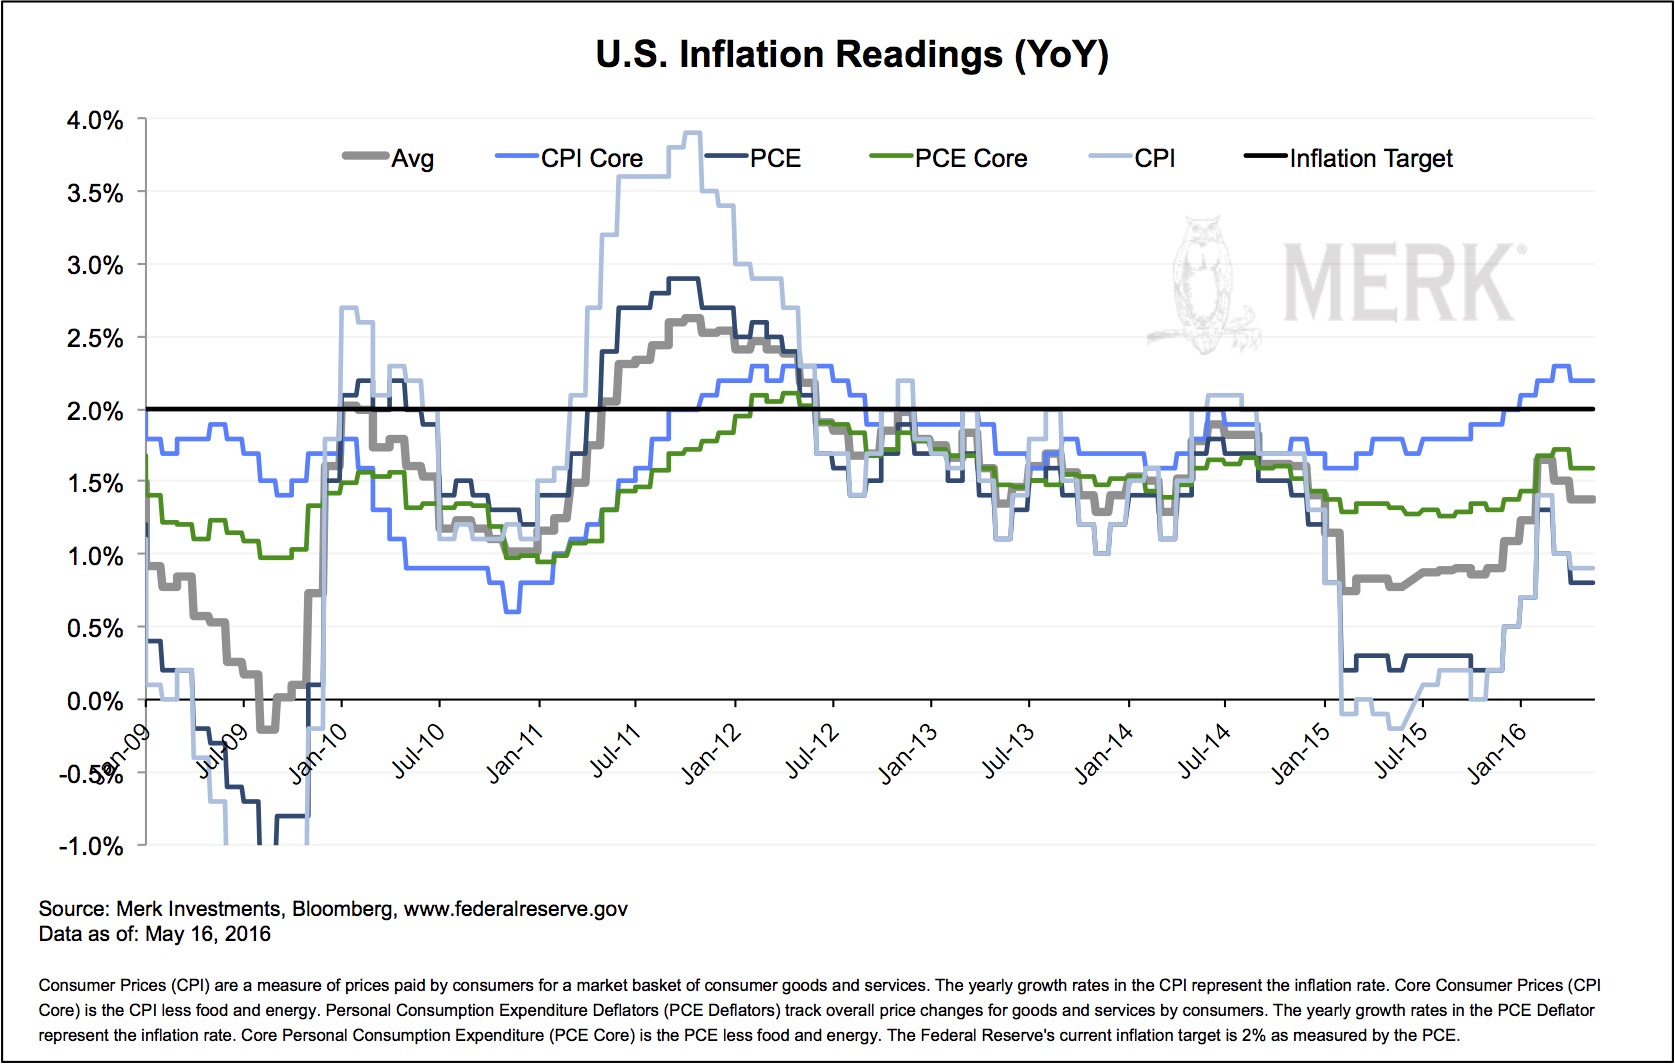 US Inflation Readings YoY 2009-2016